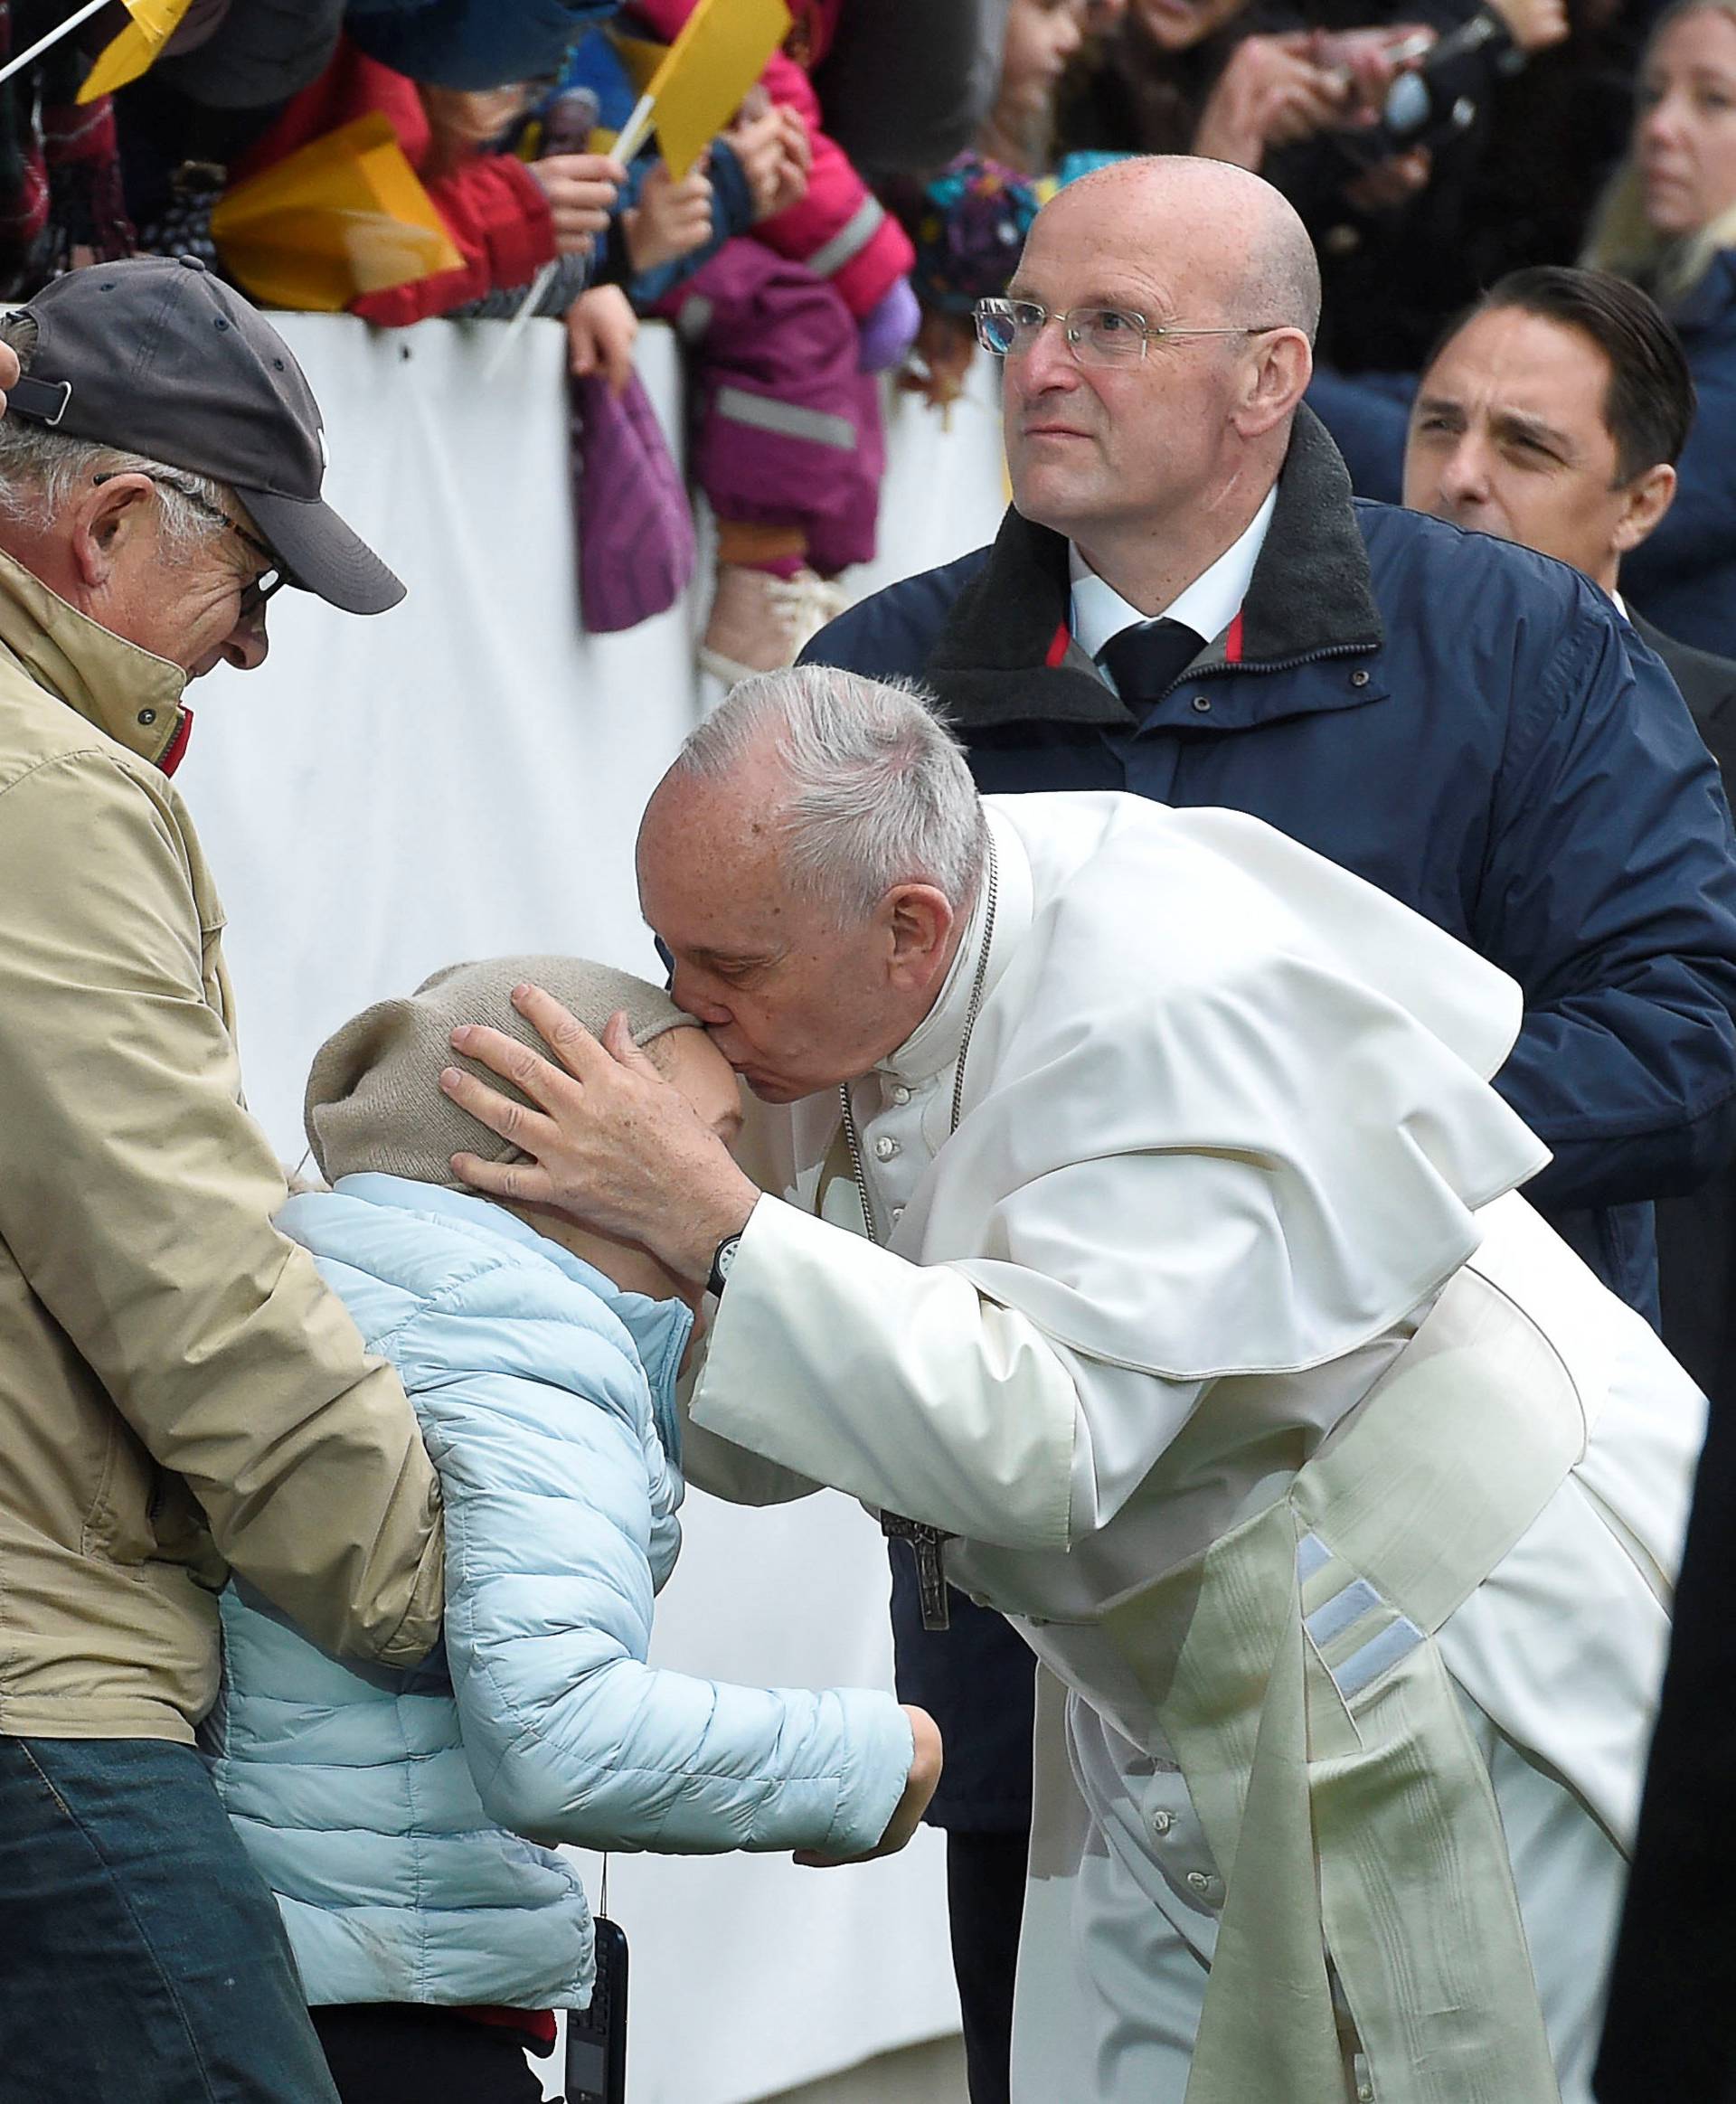 Pope Francis kisses a sick person as he arrives to lead a Holy Mass at the Swedbank Stadion in Malmo